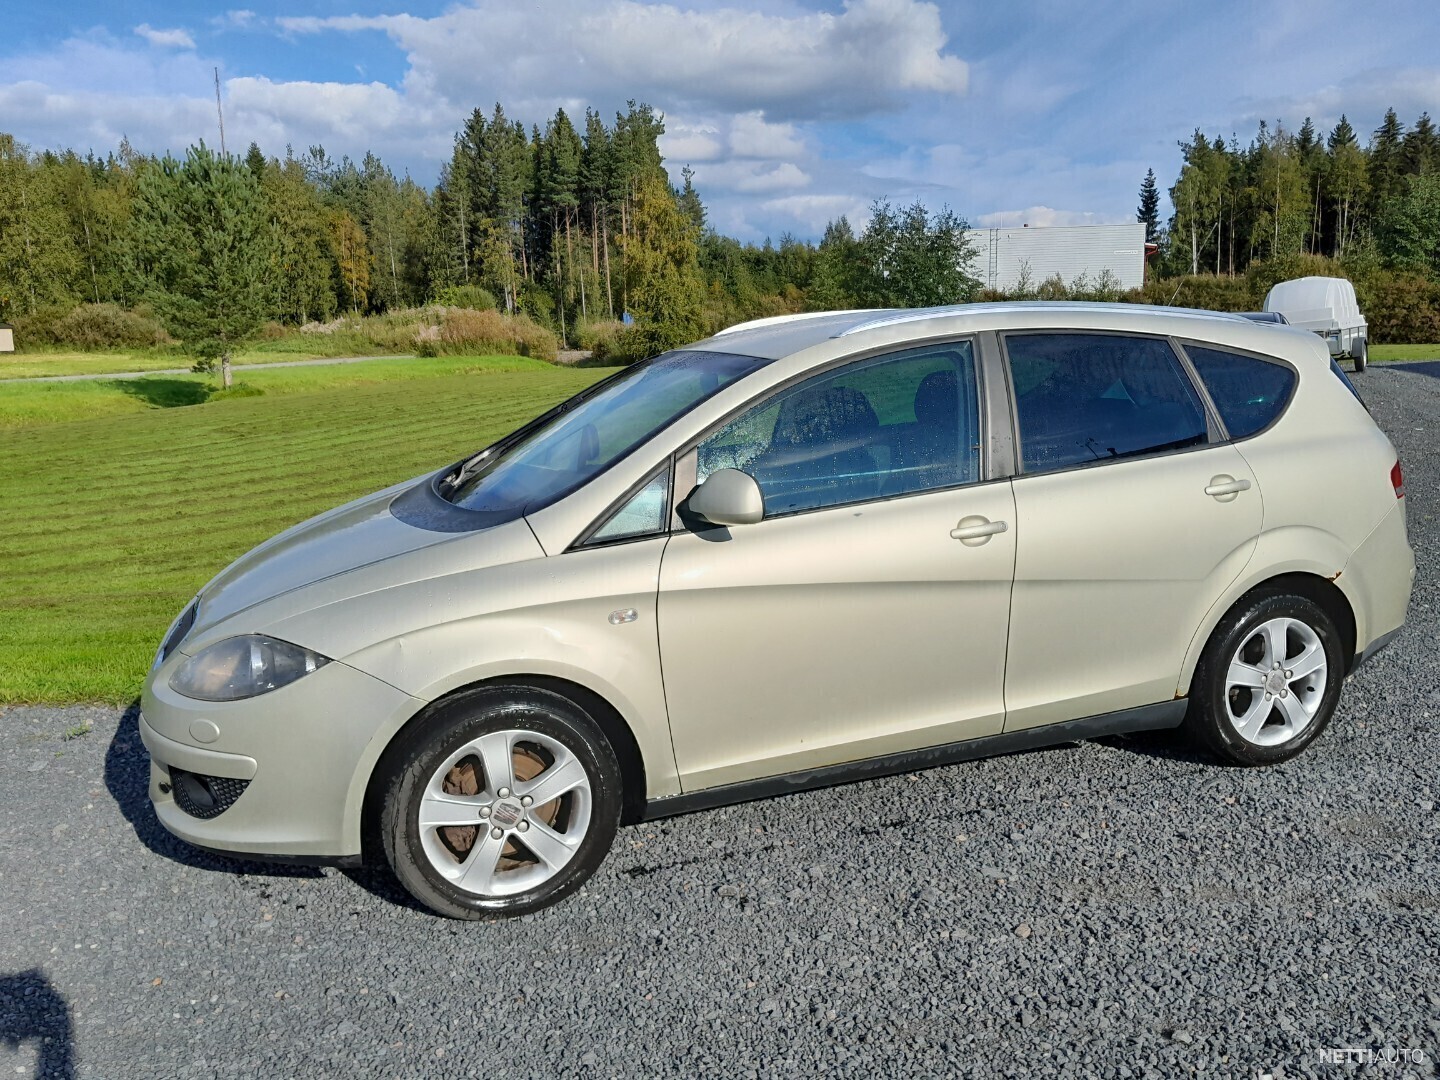 Seat Altea XL Stationwagon images (12 of 20)